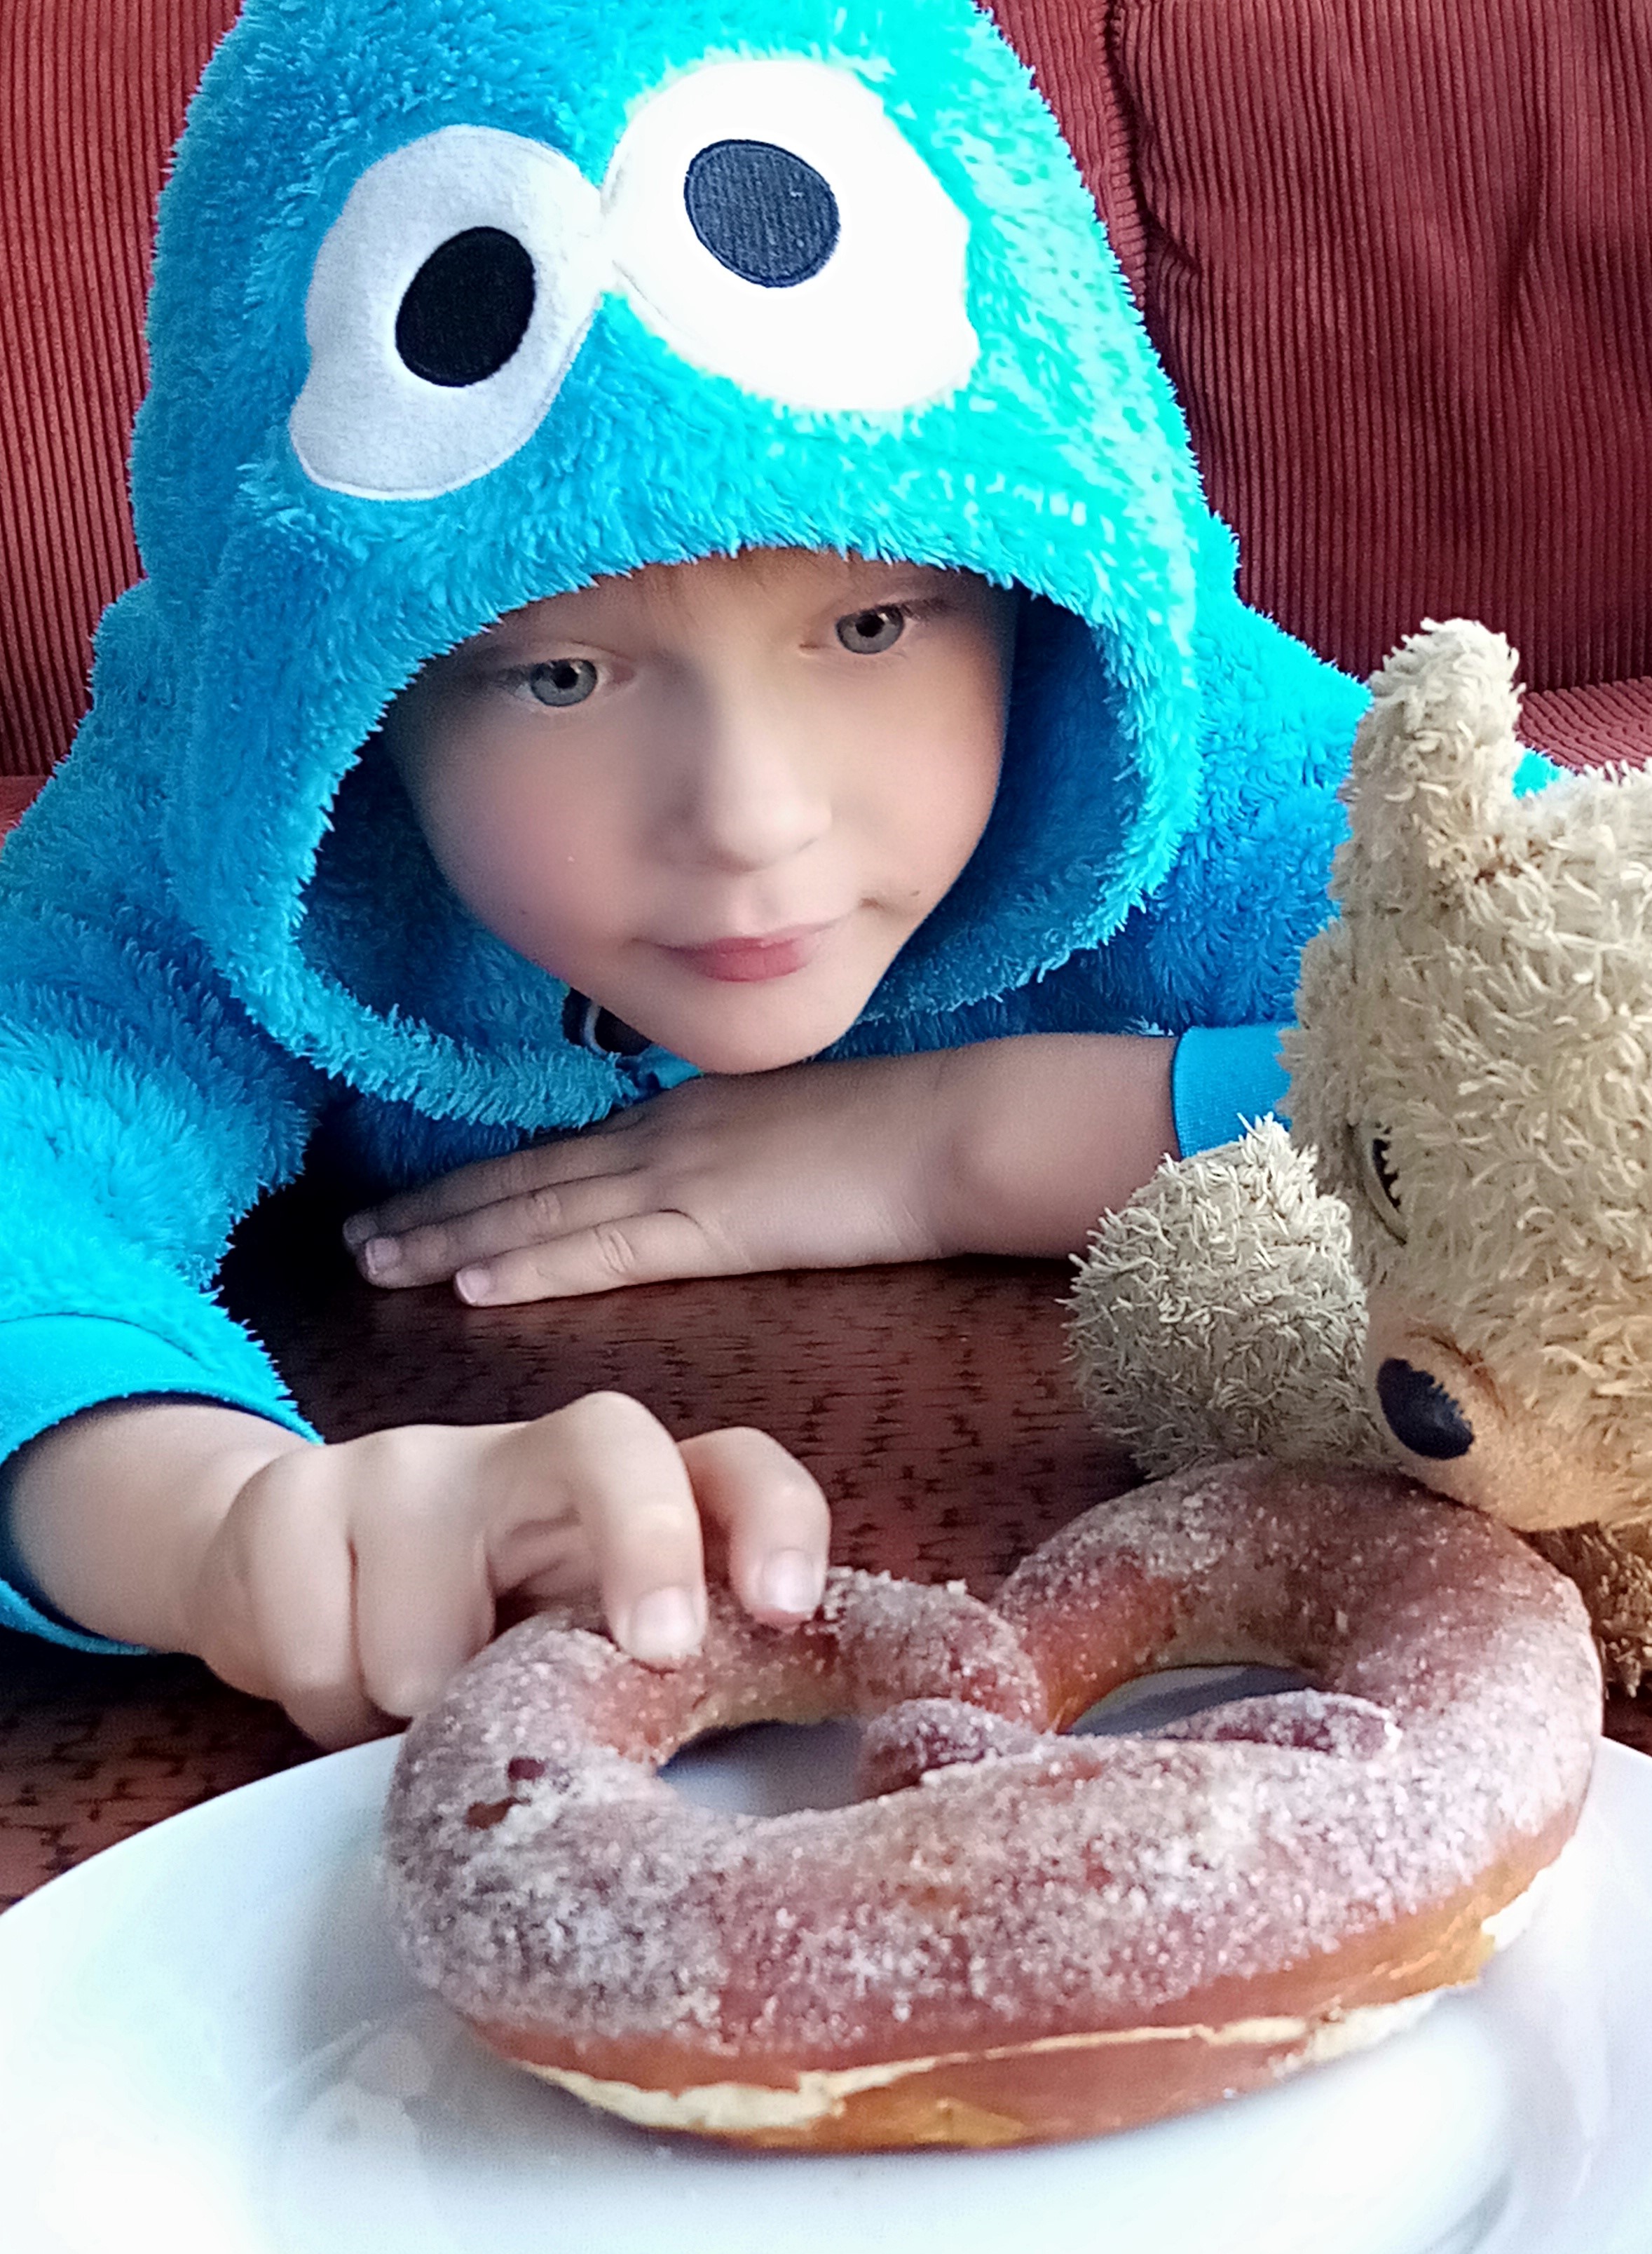 Picture of young boy reaching for a doughnout on a plate.